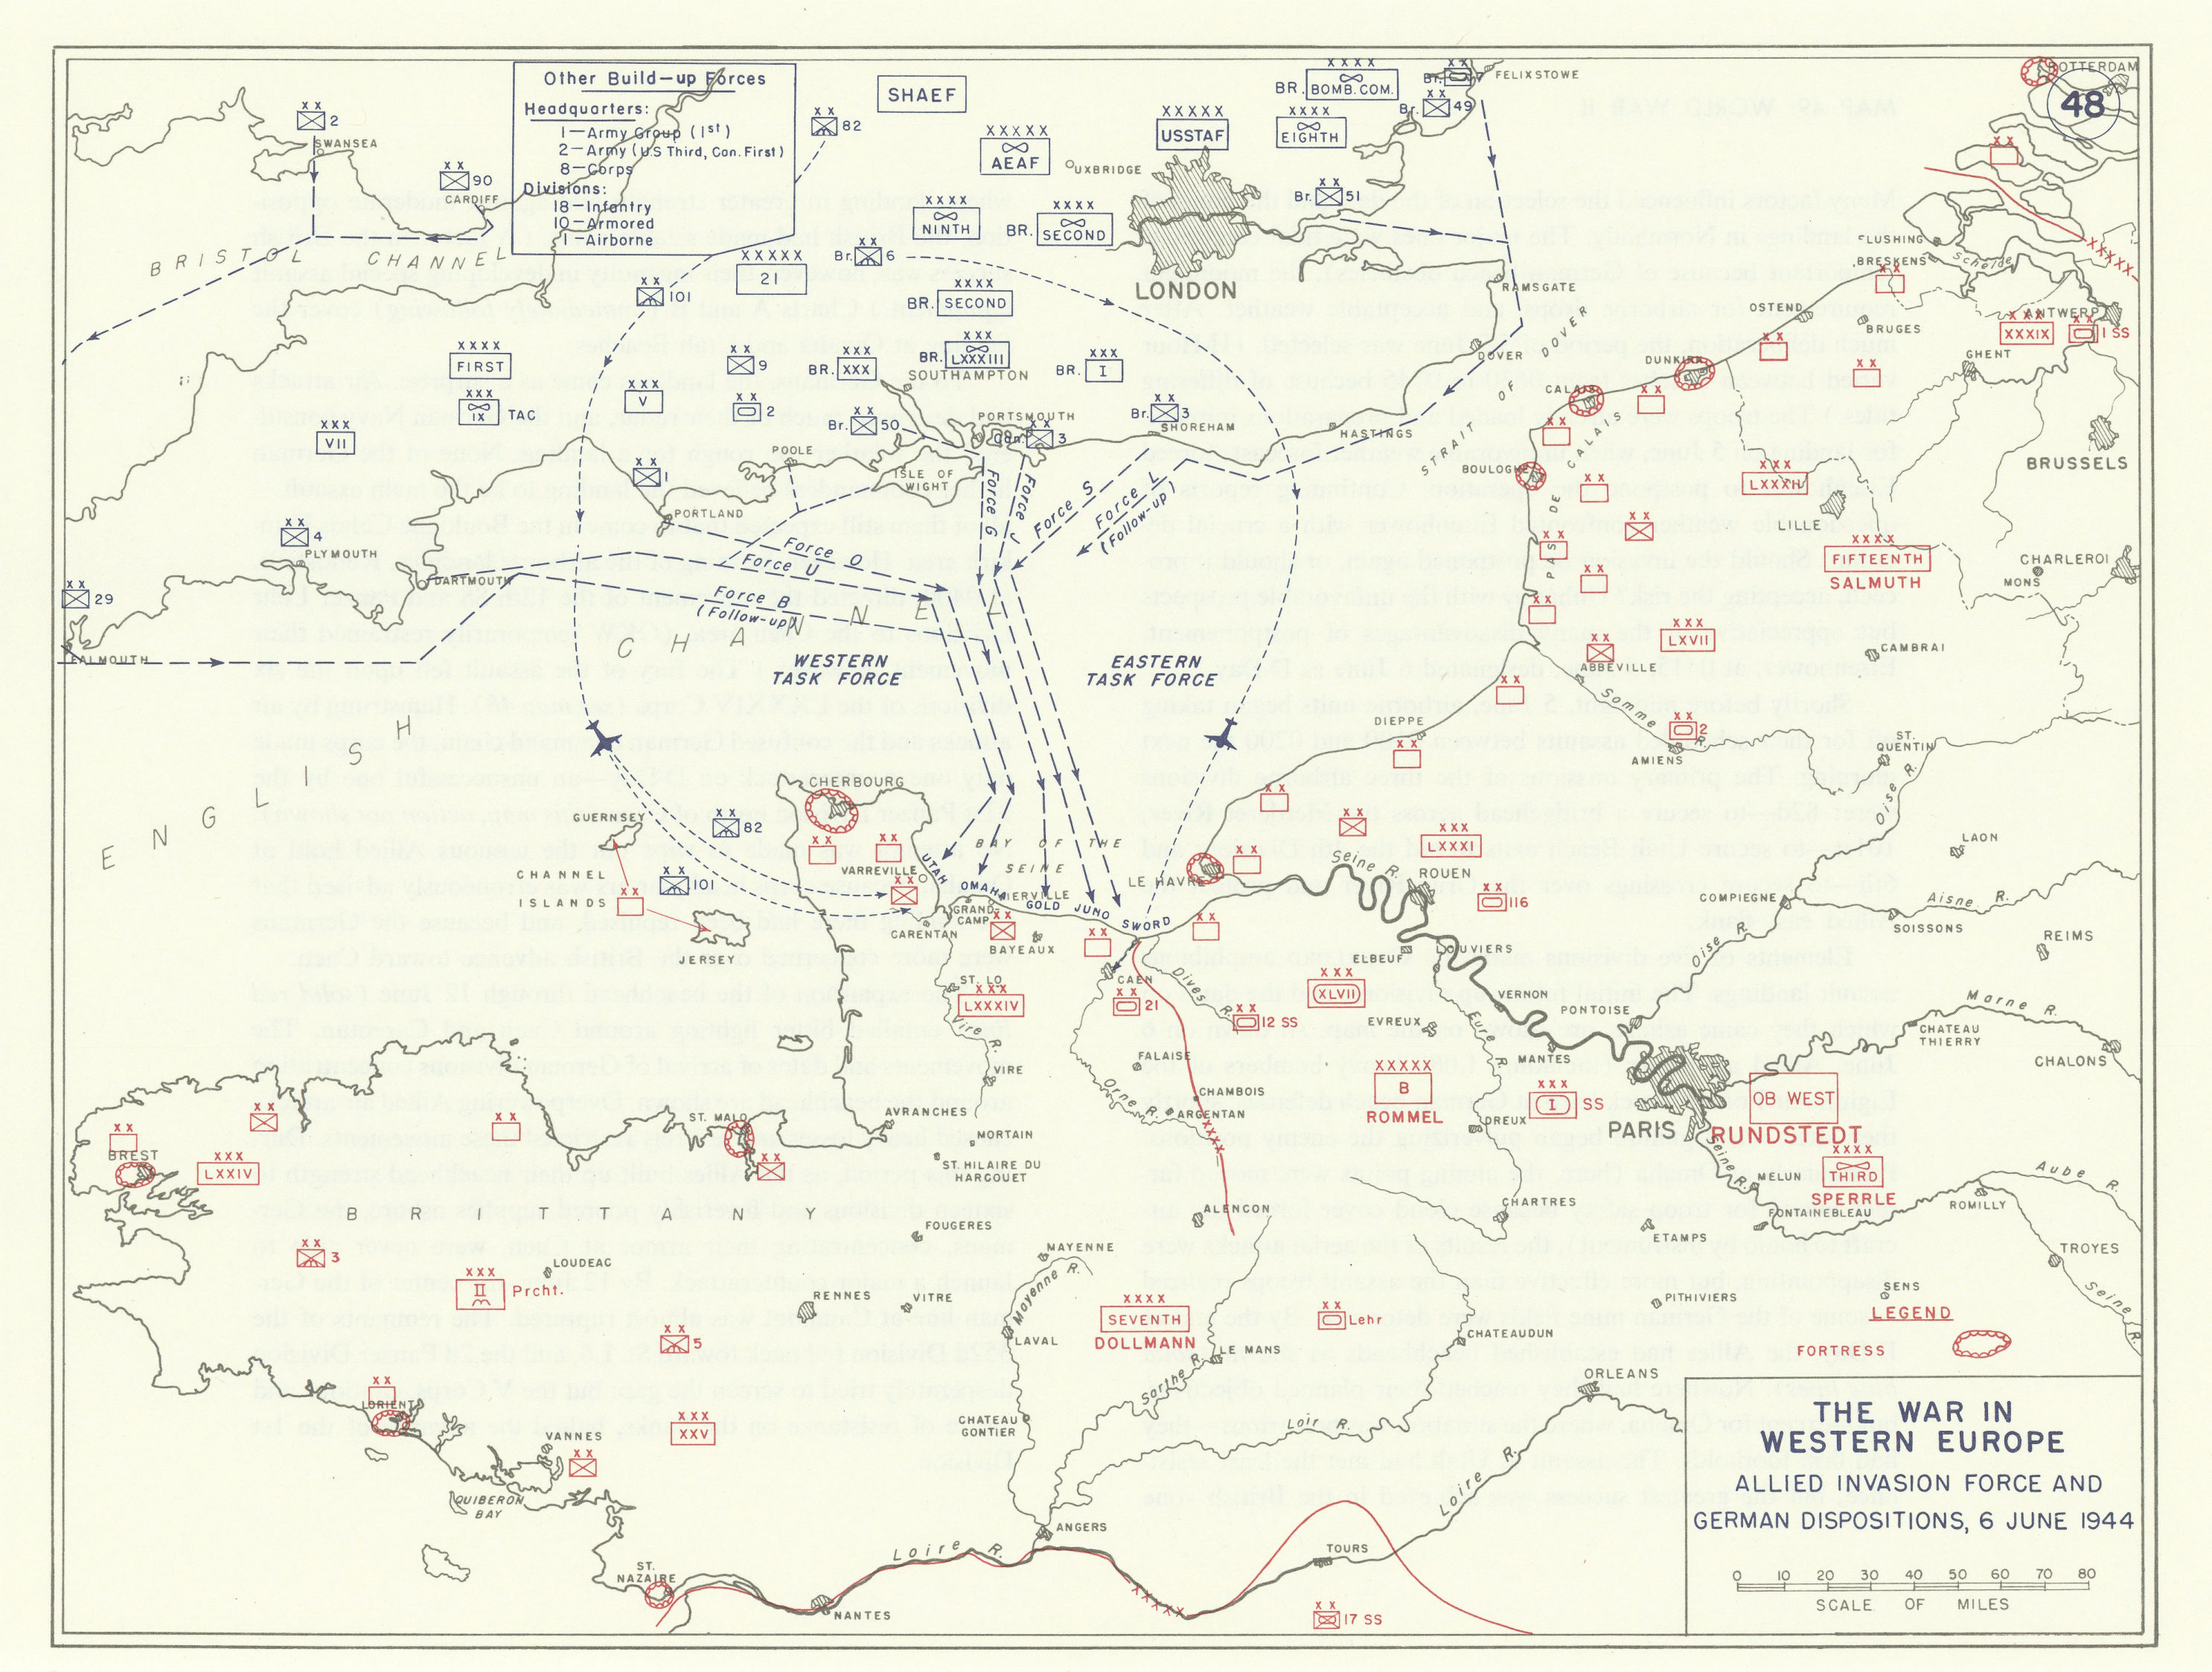 World War 2 D-Day 6 June 1944 Allied Invasion Force German Dispositions 1959 map